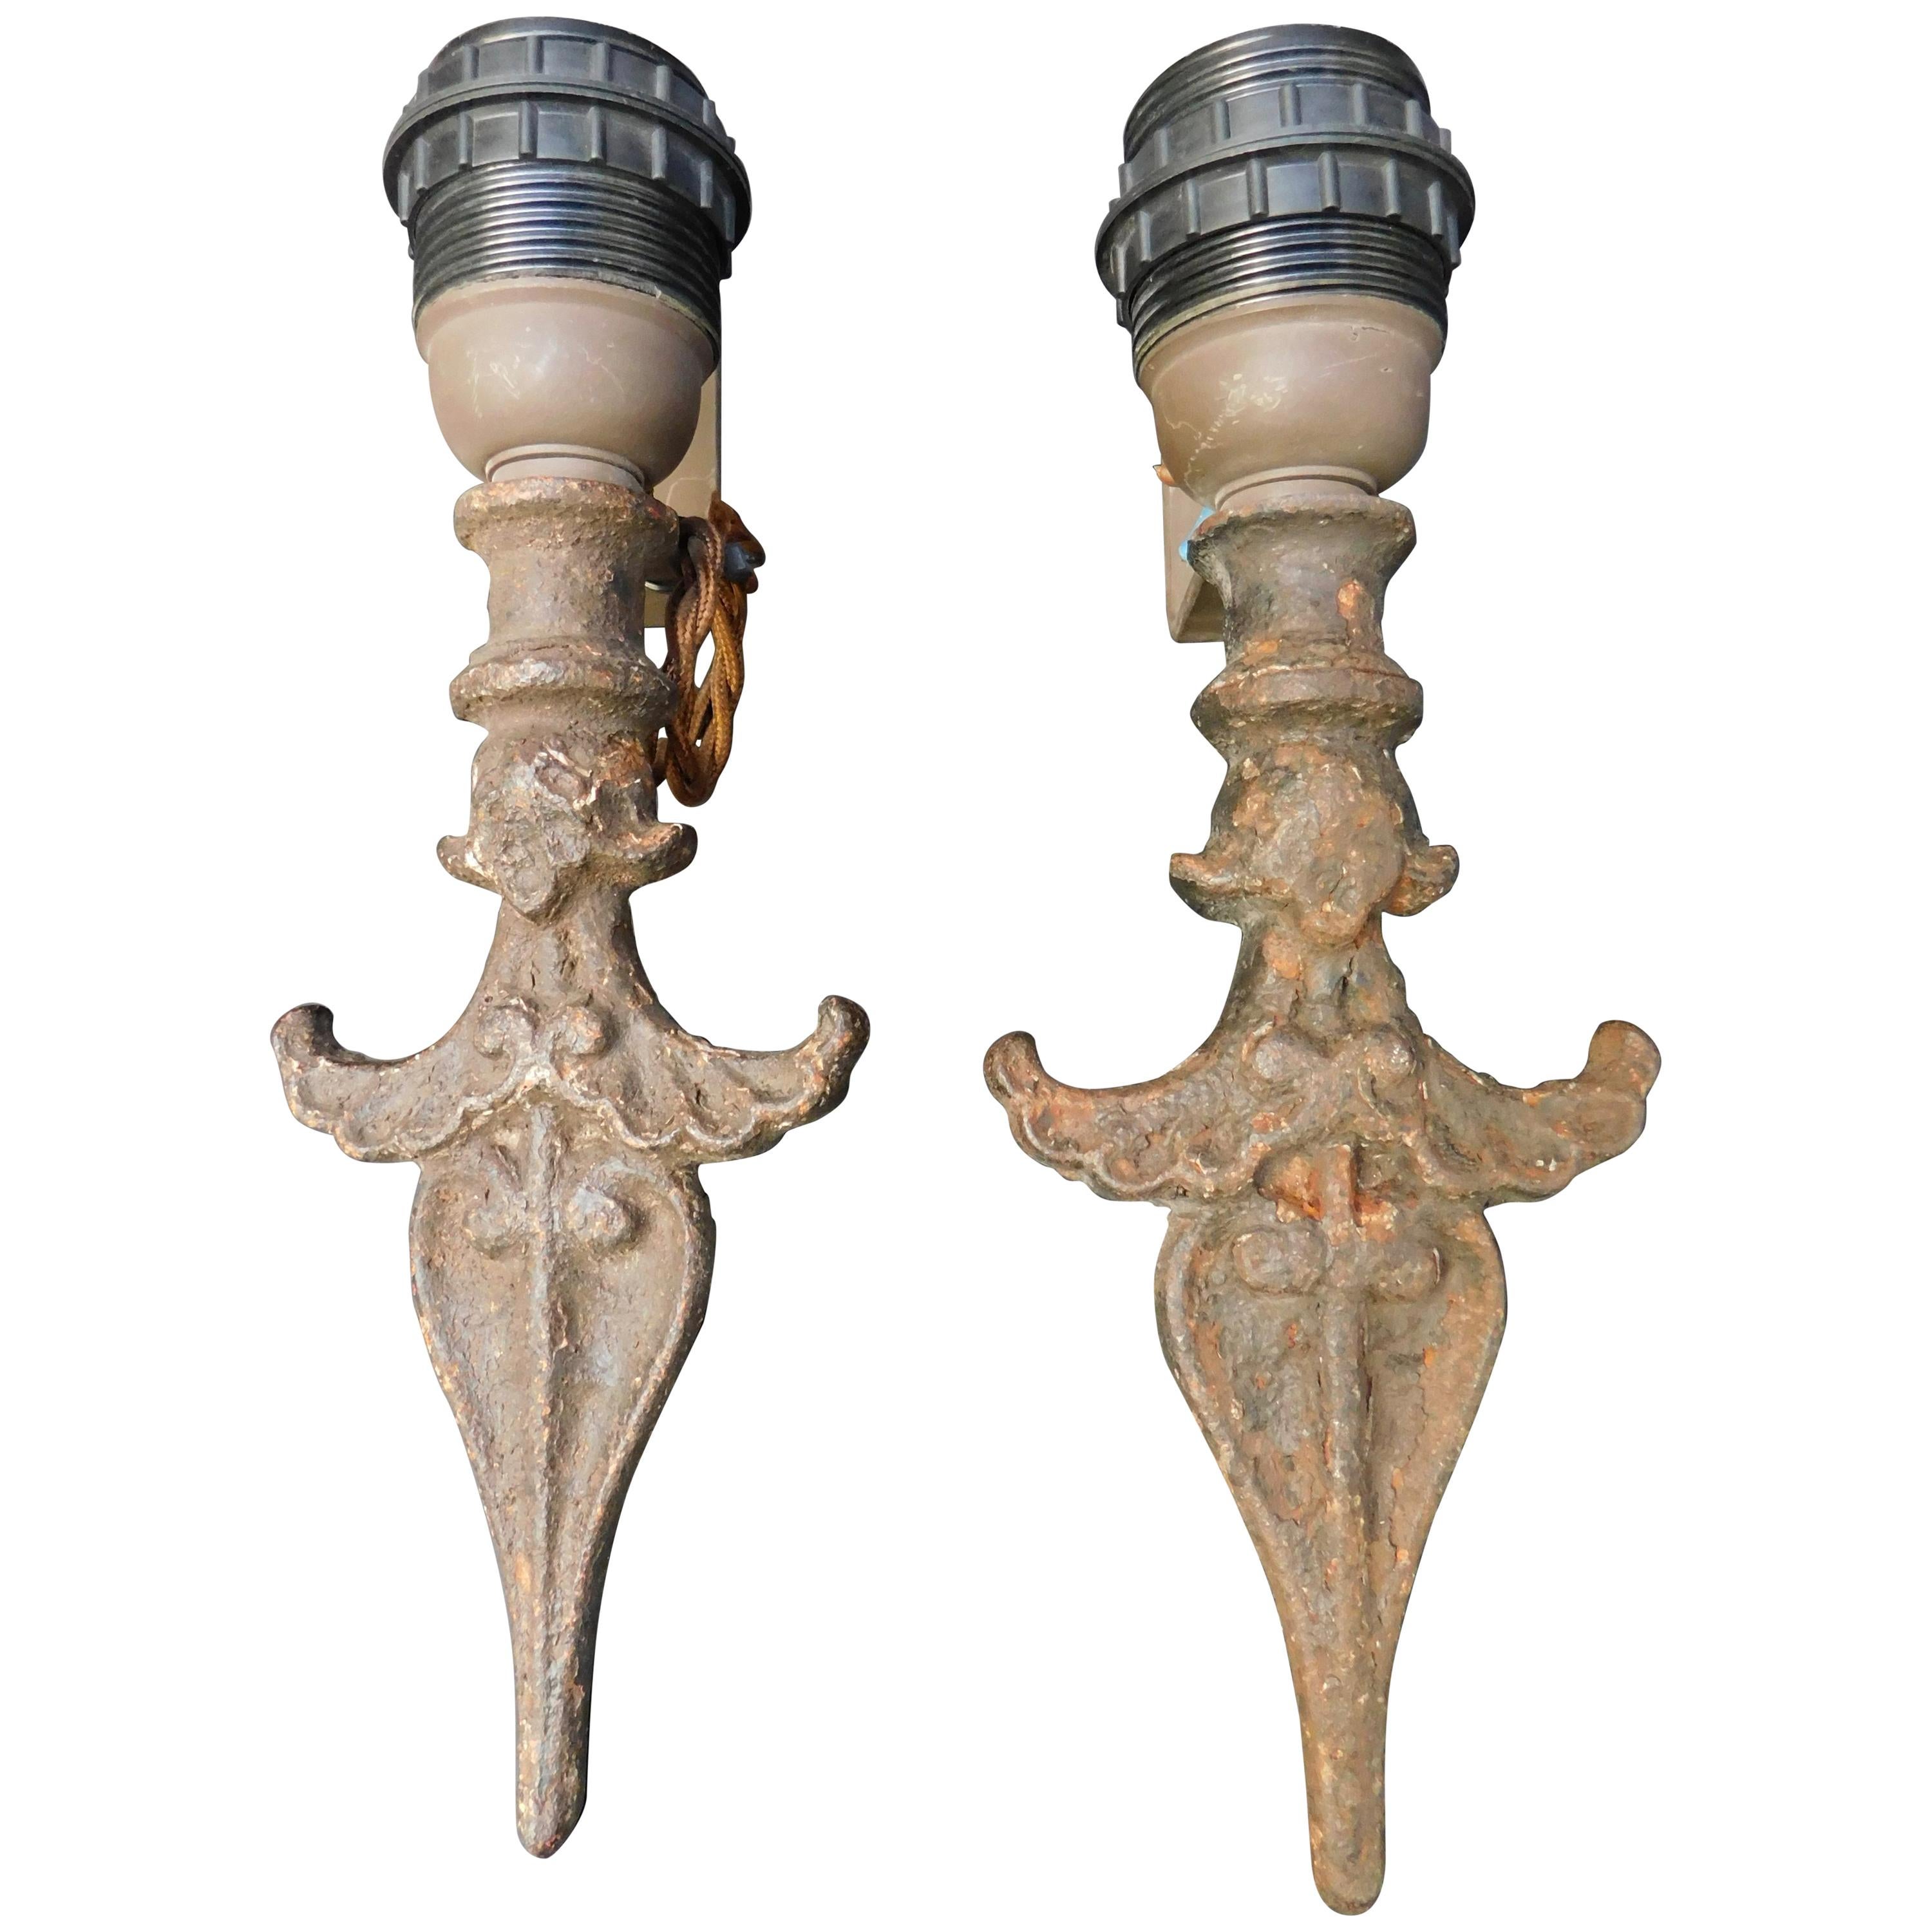 Pair of Iron Sconces Made from 19th Century Architectural Fragments